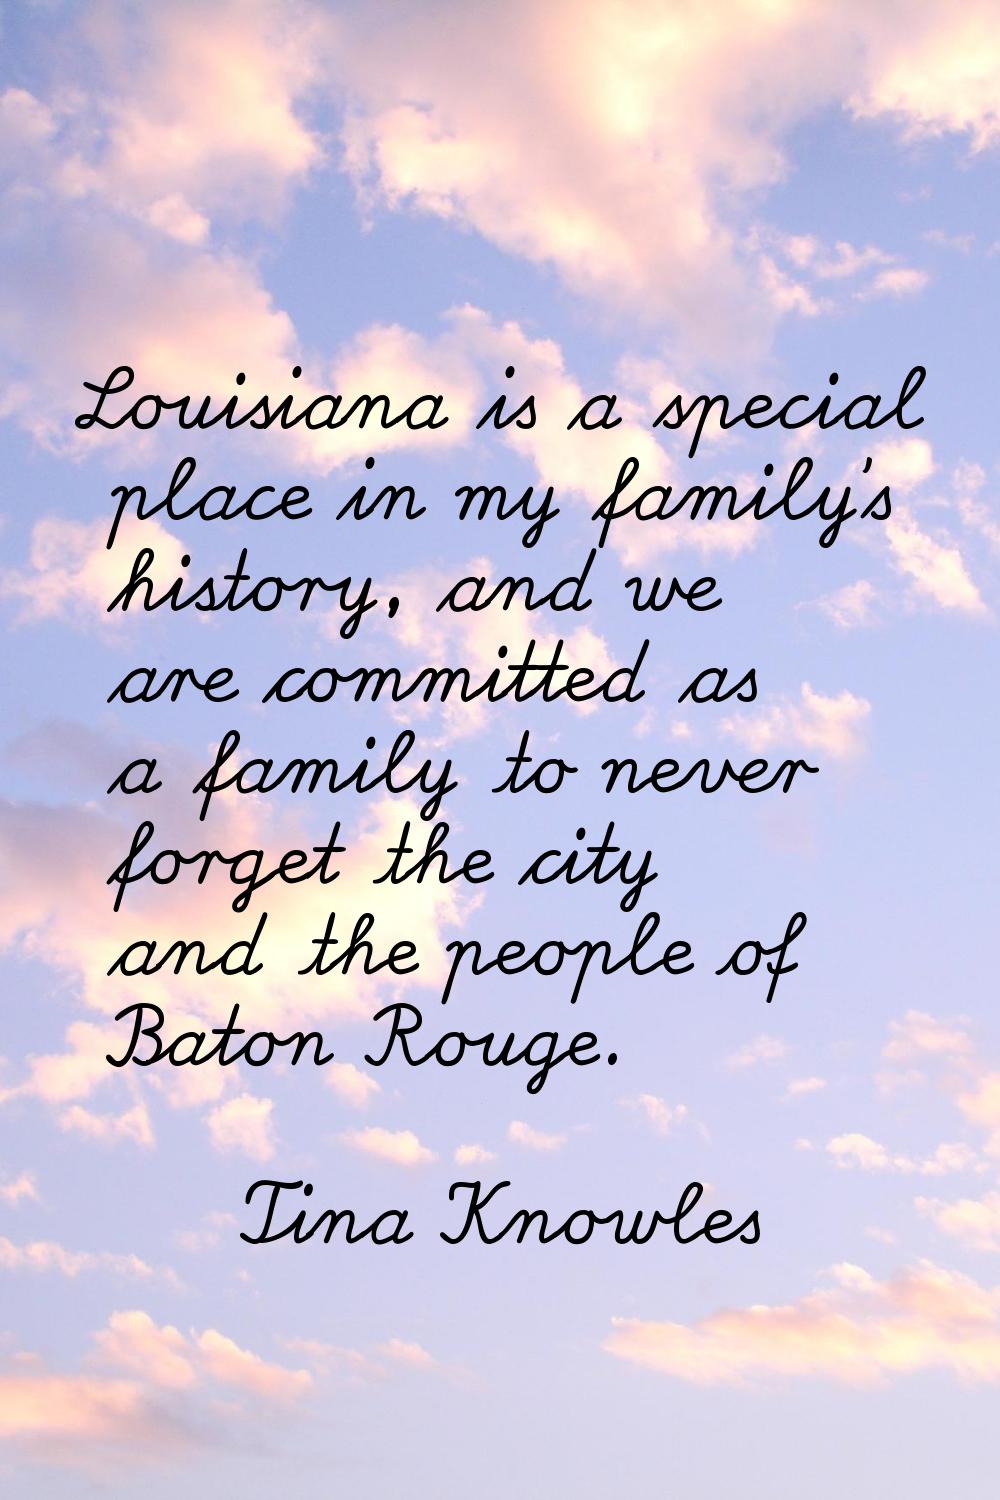 Louisiana is a special place in my family's history, and we are committed as a family to never forg